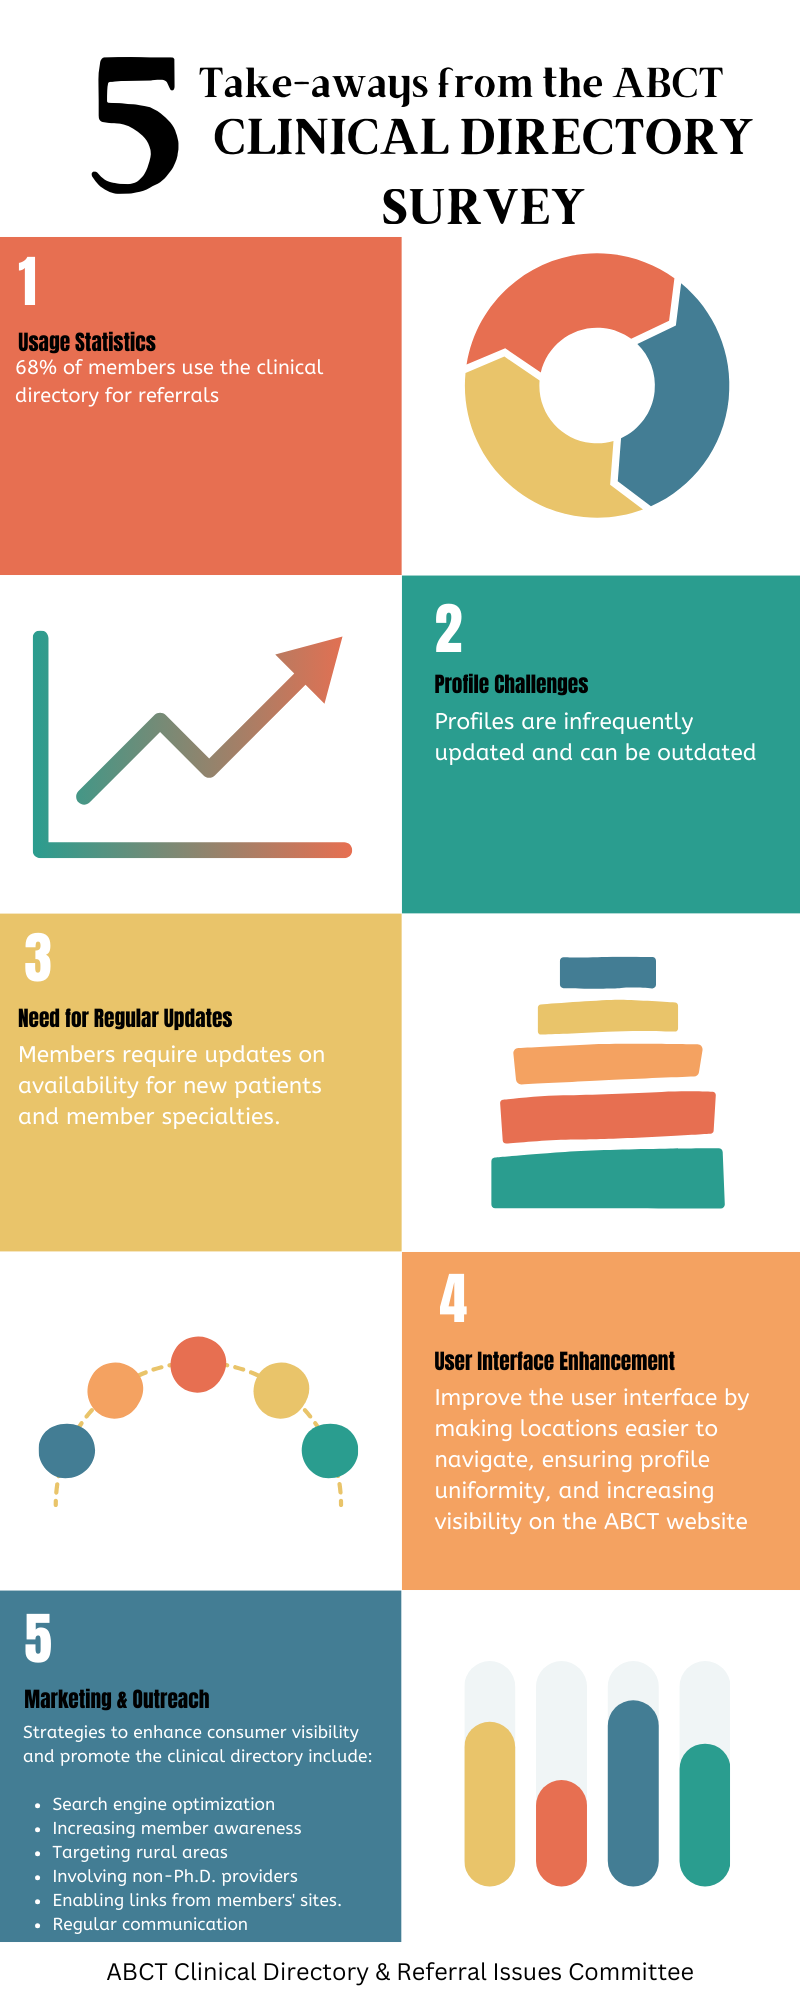 Title: 5 Take-aways from the ABCT Clinical Directory Survey<br />
1. Useage Statistics: 68% of members use the clinical directory for referrals</p>
<p>2. Profile Changes: Profiles are infrequently updated and can be outdated</p>
<p>3. Need for Regular Updates: Members require updates on availability for new patients and member specialties.</p>
<p>4. User Interface Enhancement: Improve the user interface by making locations easier to navigate, ensuring profile uniforminty, and increasing visibility on the ABCT website</p>
<p>5. Marketing & Outreach: Strategies to enhance consumer visibility and promote the clinical directory include:<br />
- Search Engine Optimization<br />
- Increasing member awareness<br />
- Targeting rural areas<br />
- Involving non-Ph.D. provides<br />
- Enabling links from members' sites<br />
- Regular communication